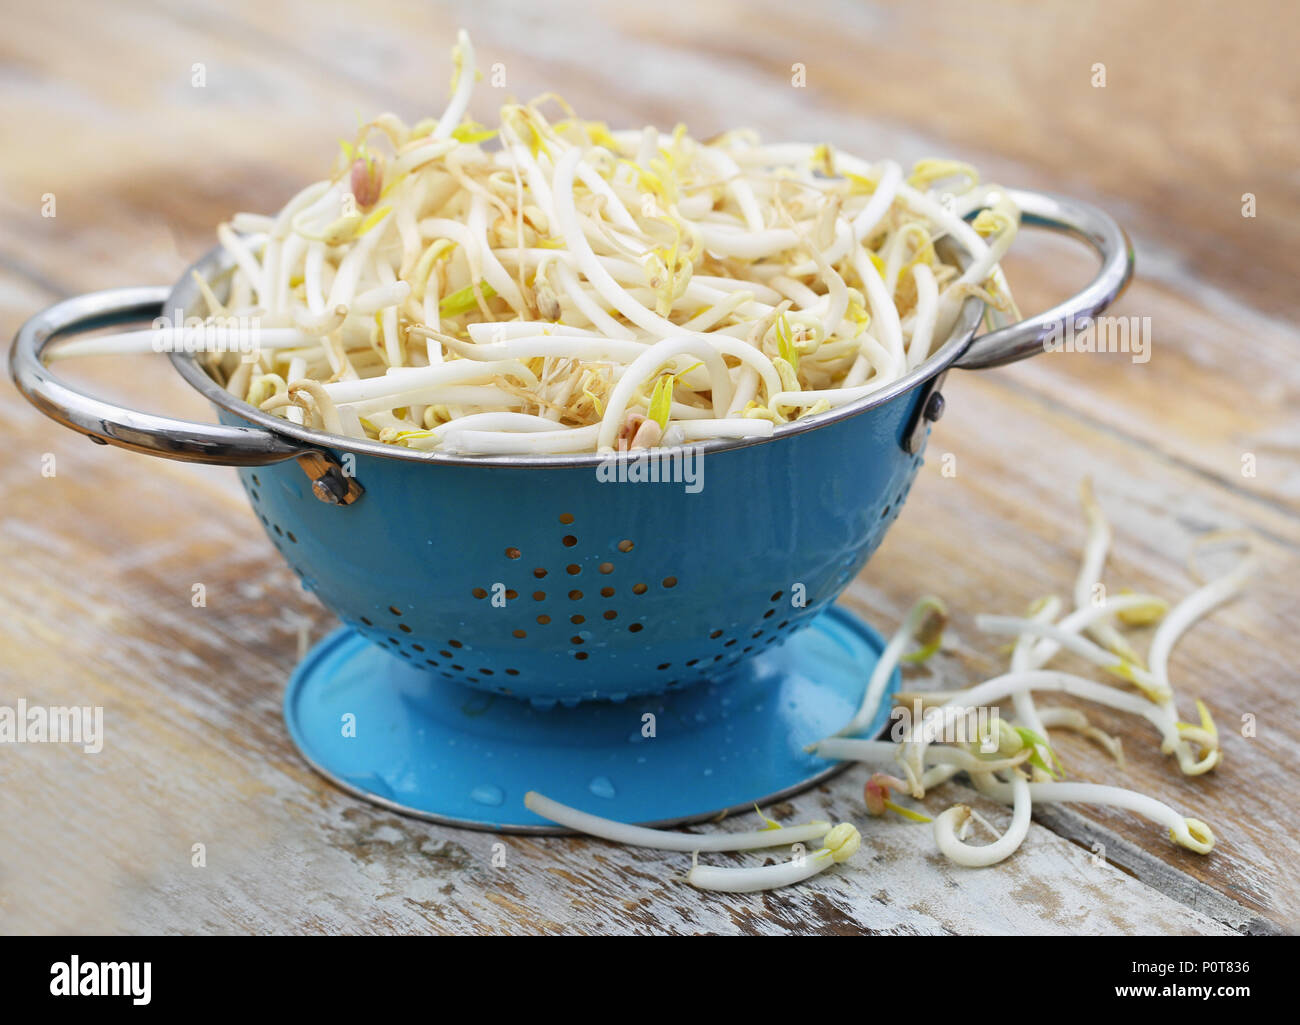 Raw beansprouts in blue metal colander on rustic wooden surface Stock Photo